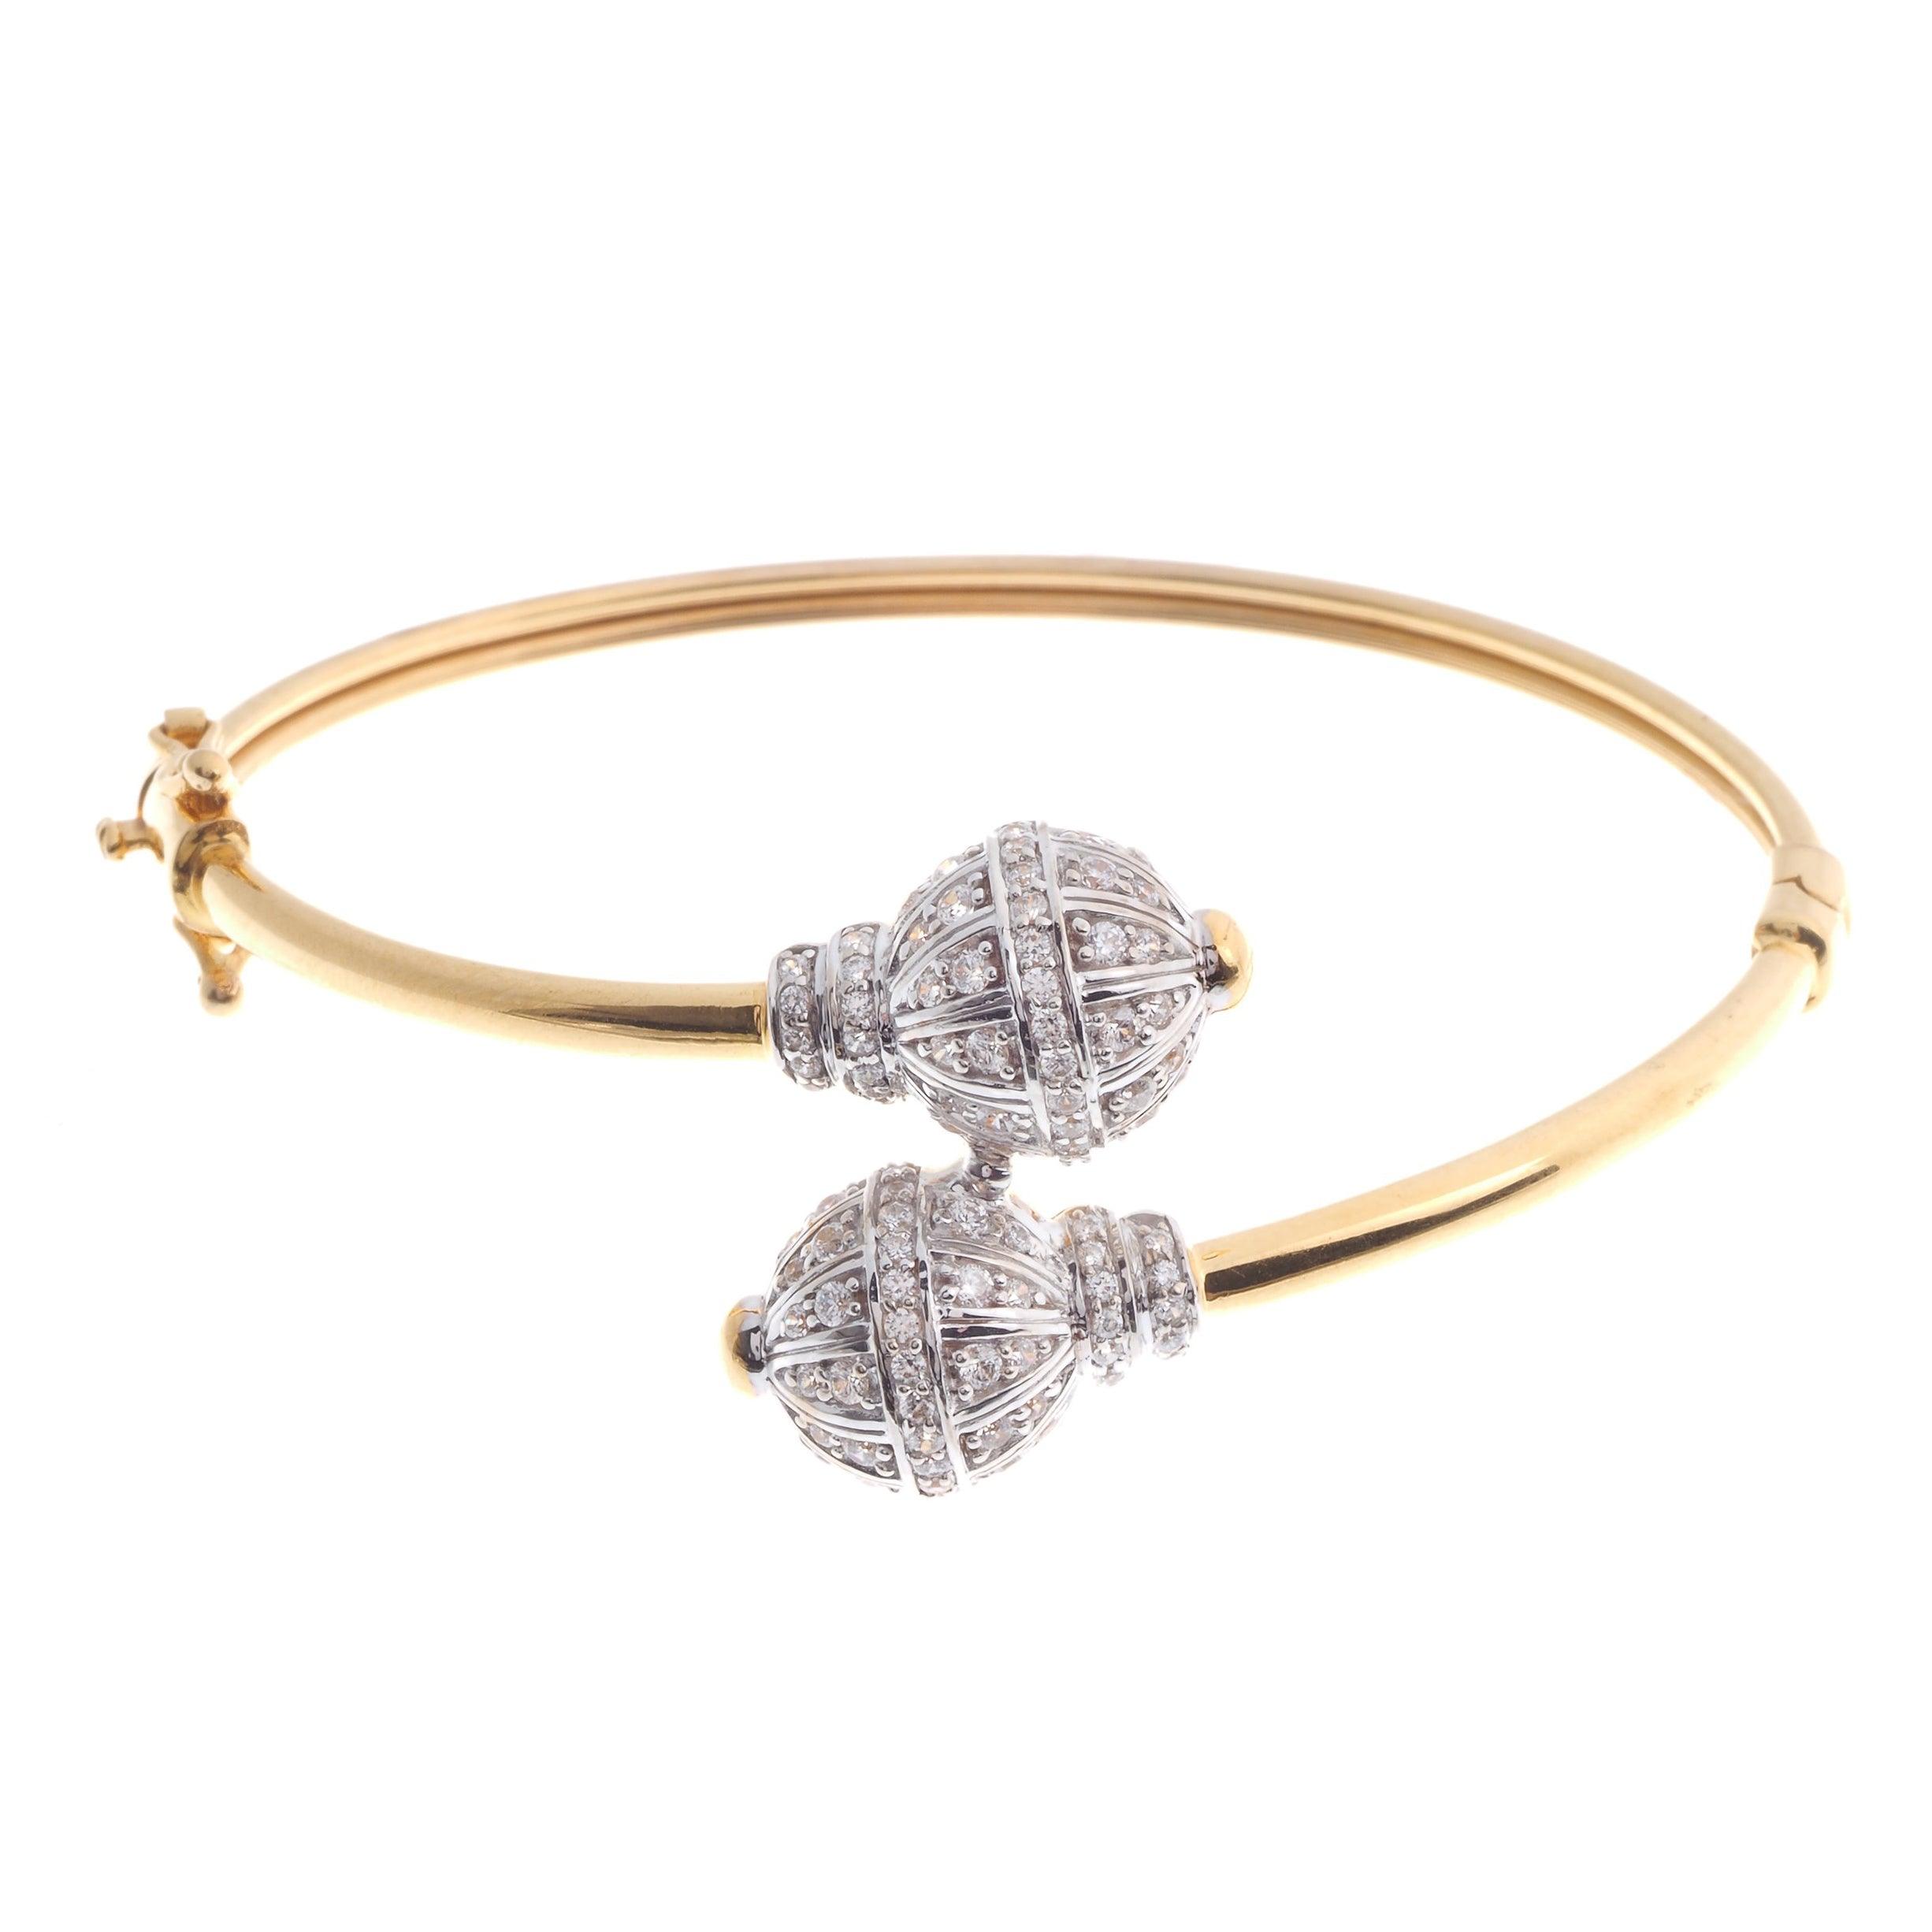 22ct Yellow Gold Cubic Zirconia Bangle with clasp (19.03g) LKB9004 - Minar Jewellers